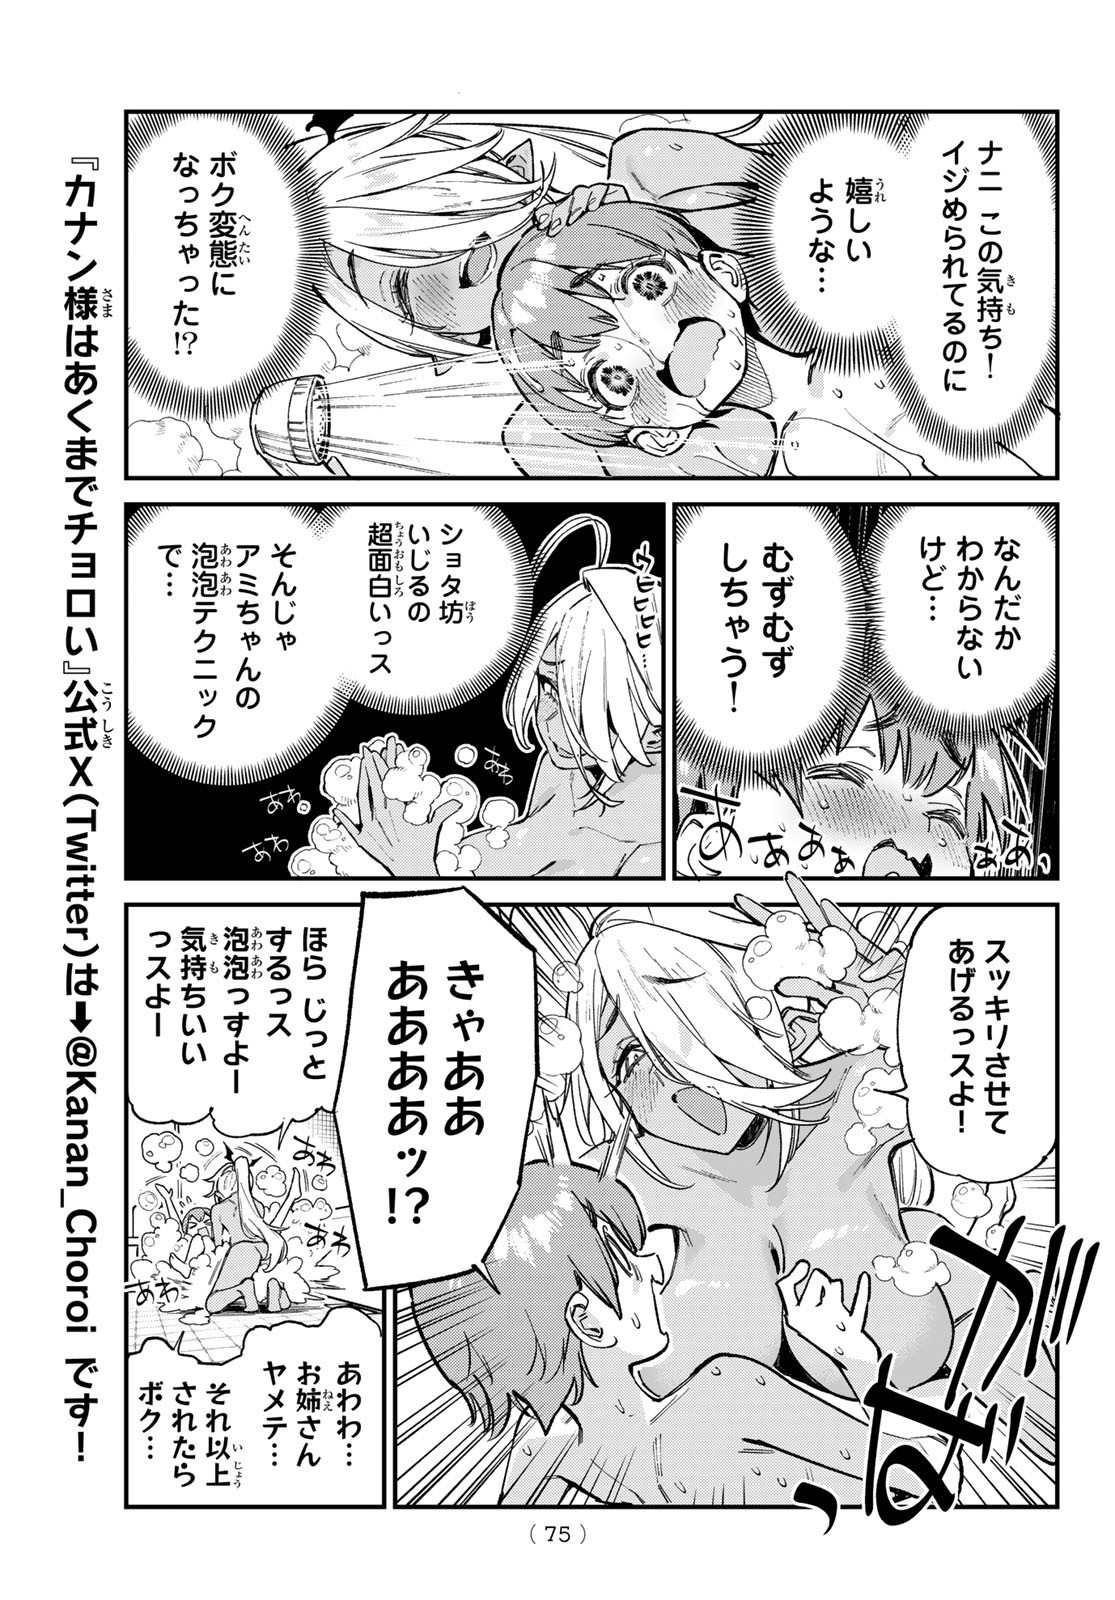 Weekly Shōnen Magazine - 週刊少年マガジン - Chapter 2024-28 - Page 74